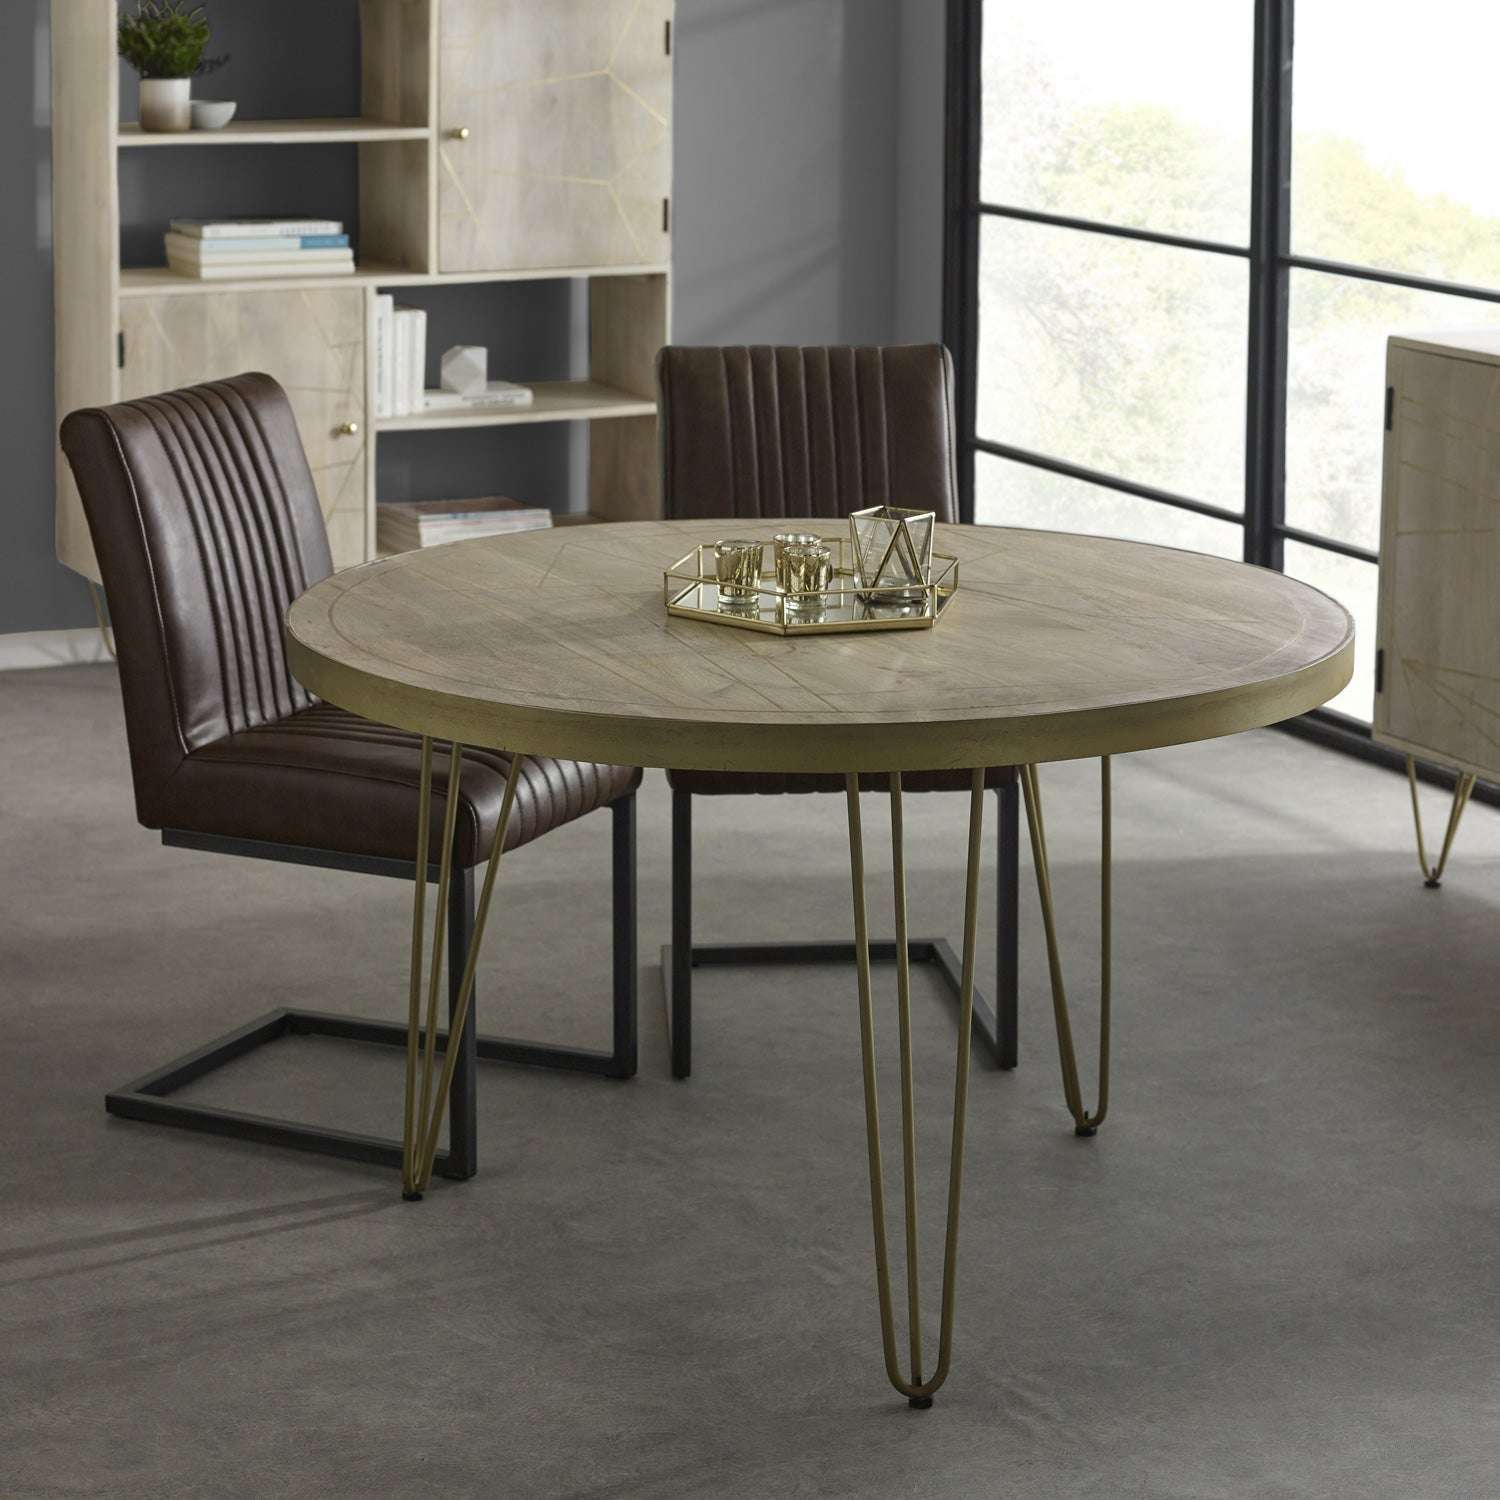 Ashpinoke:Light Gold Round Dining Table,Dining Tables,Indian Hub